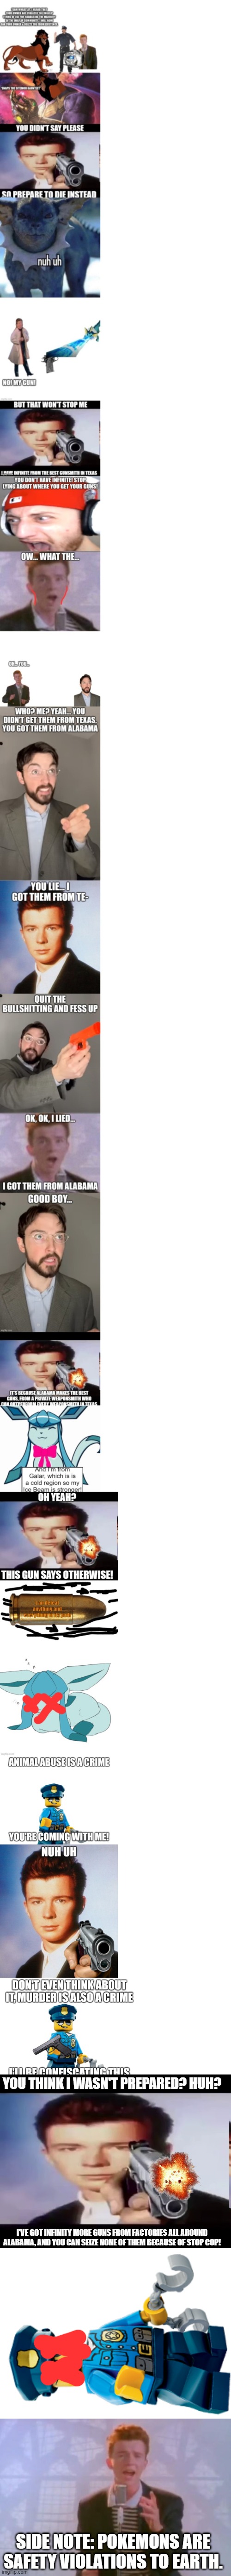 YOU THINK I WASN'T PREPARED? HUH? I'VE GOT INFINITY MORE GUNS FROM FACTORIES ALL AROUND ALABAMA, AND YOU CAN SEIZE NONE OF THEM BECAUSE OF STOP COP! SIDE NOTE: POKEMONS ARE SAFETY VIOLATIONS TO EARTH. | image tagged in rick with gun,police officer,rick astley | made w/ Imgflip meme maker